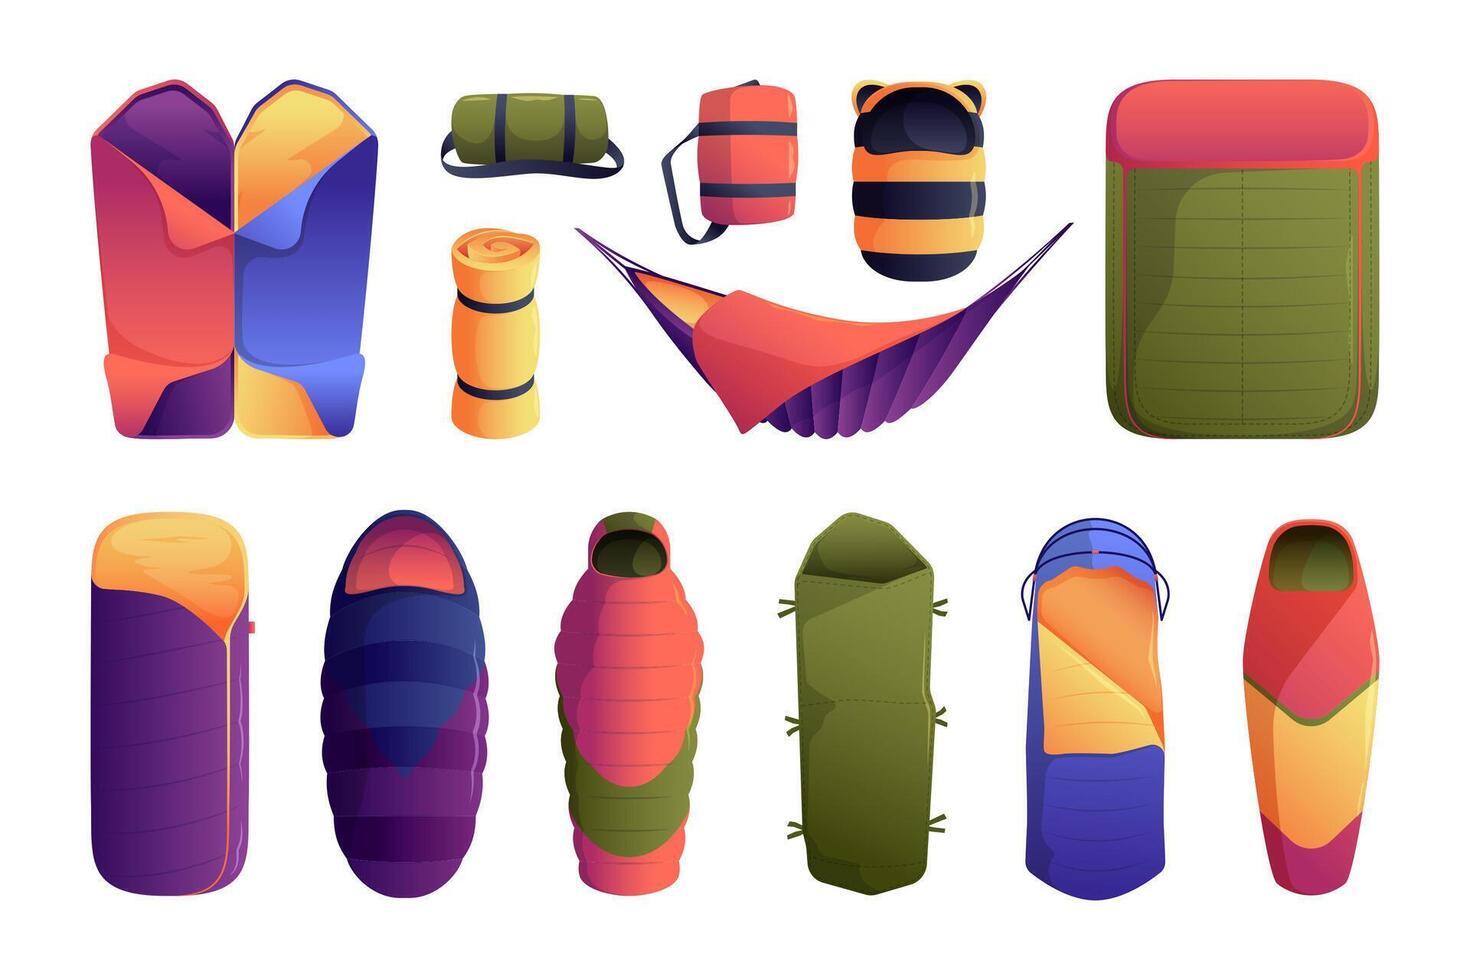 Sleeping bag. Cartoon travel outdoor equipment for sleep, flat hiking camping fabric nylon polyester compact bedding roll with blanket. Vector isolated set